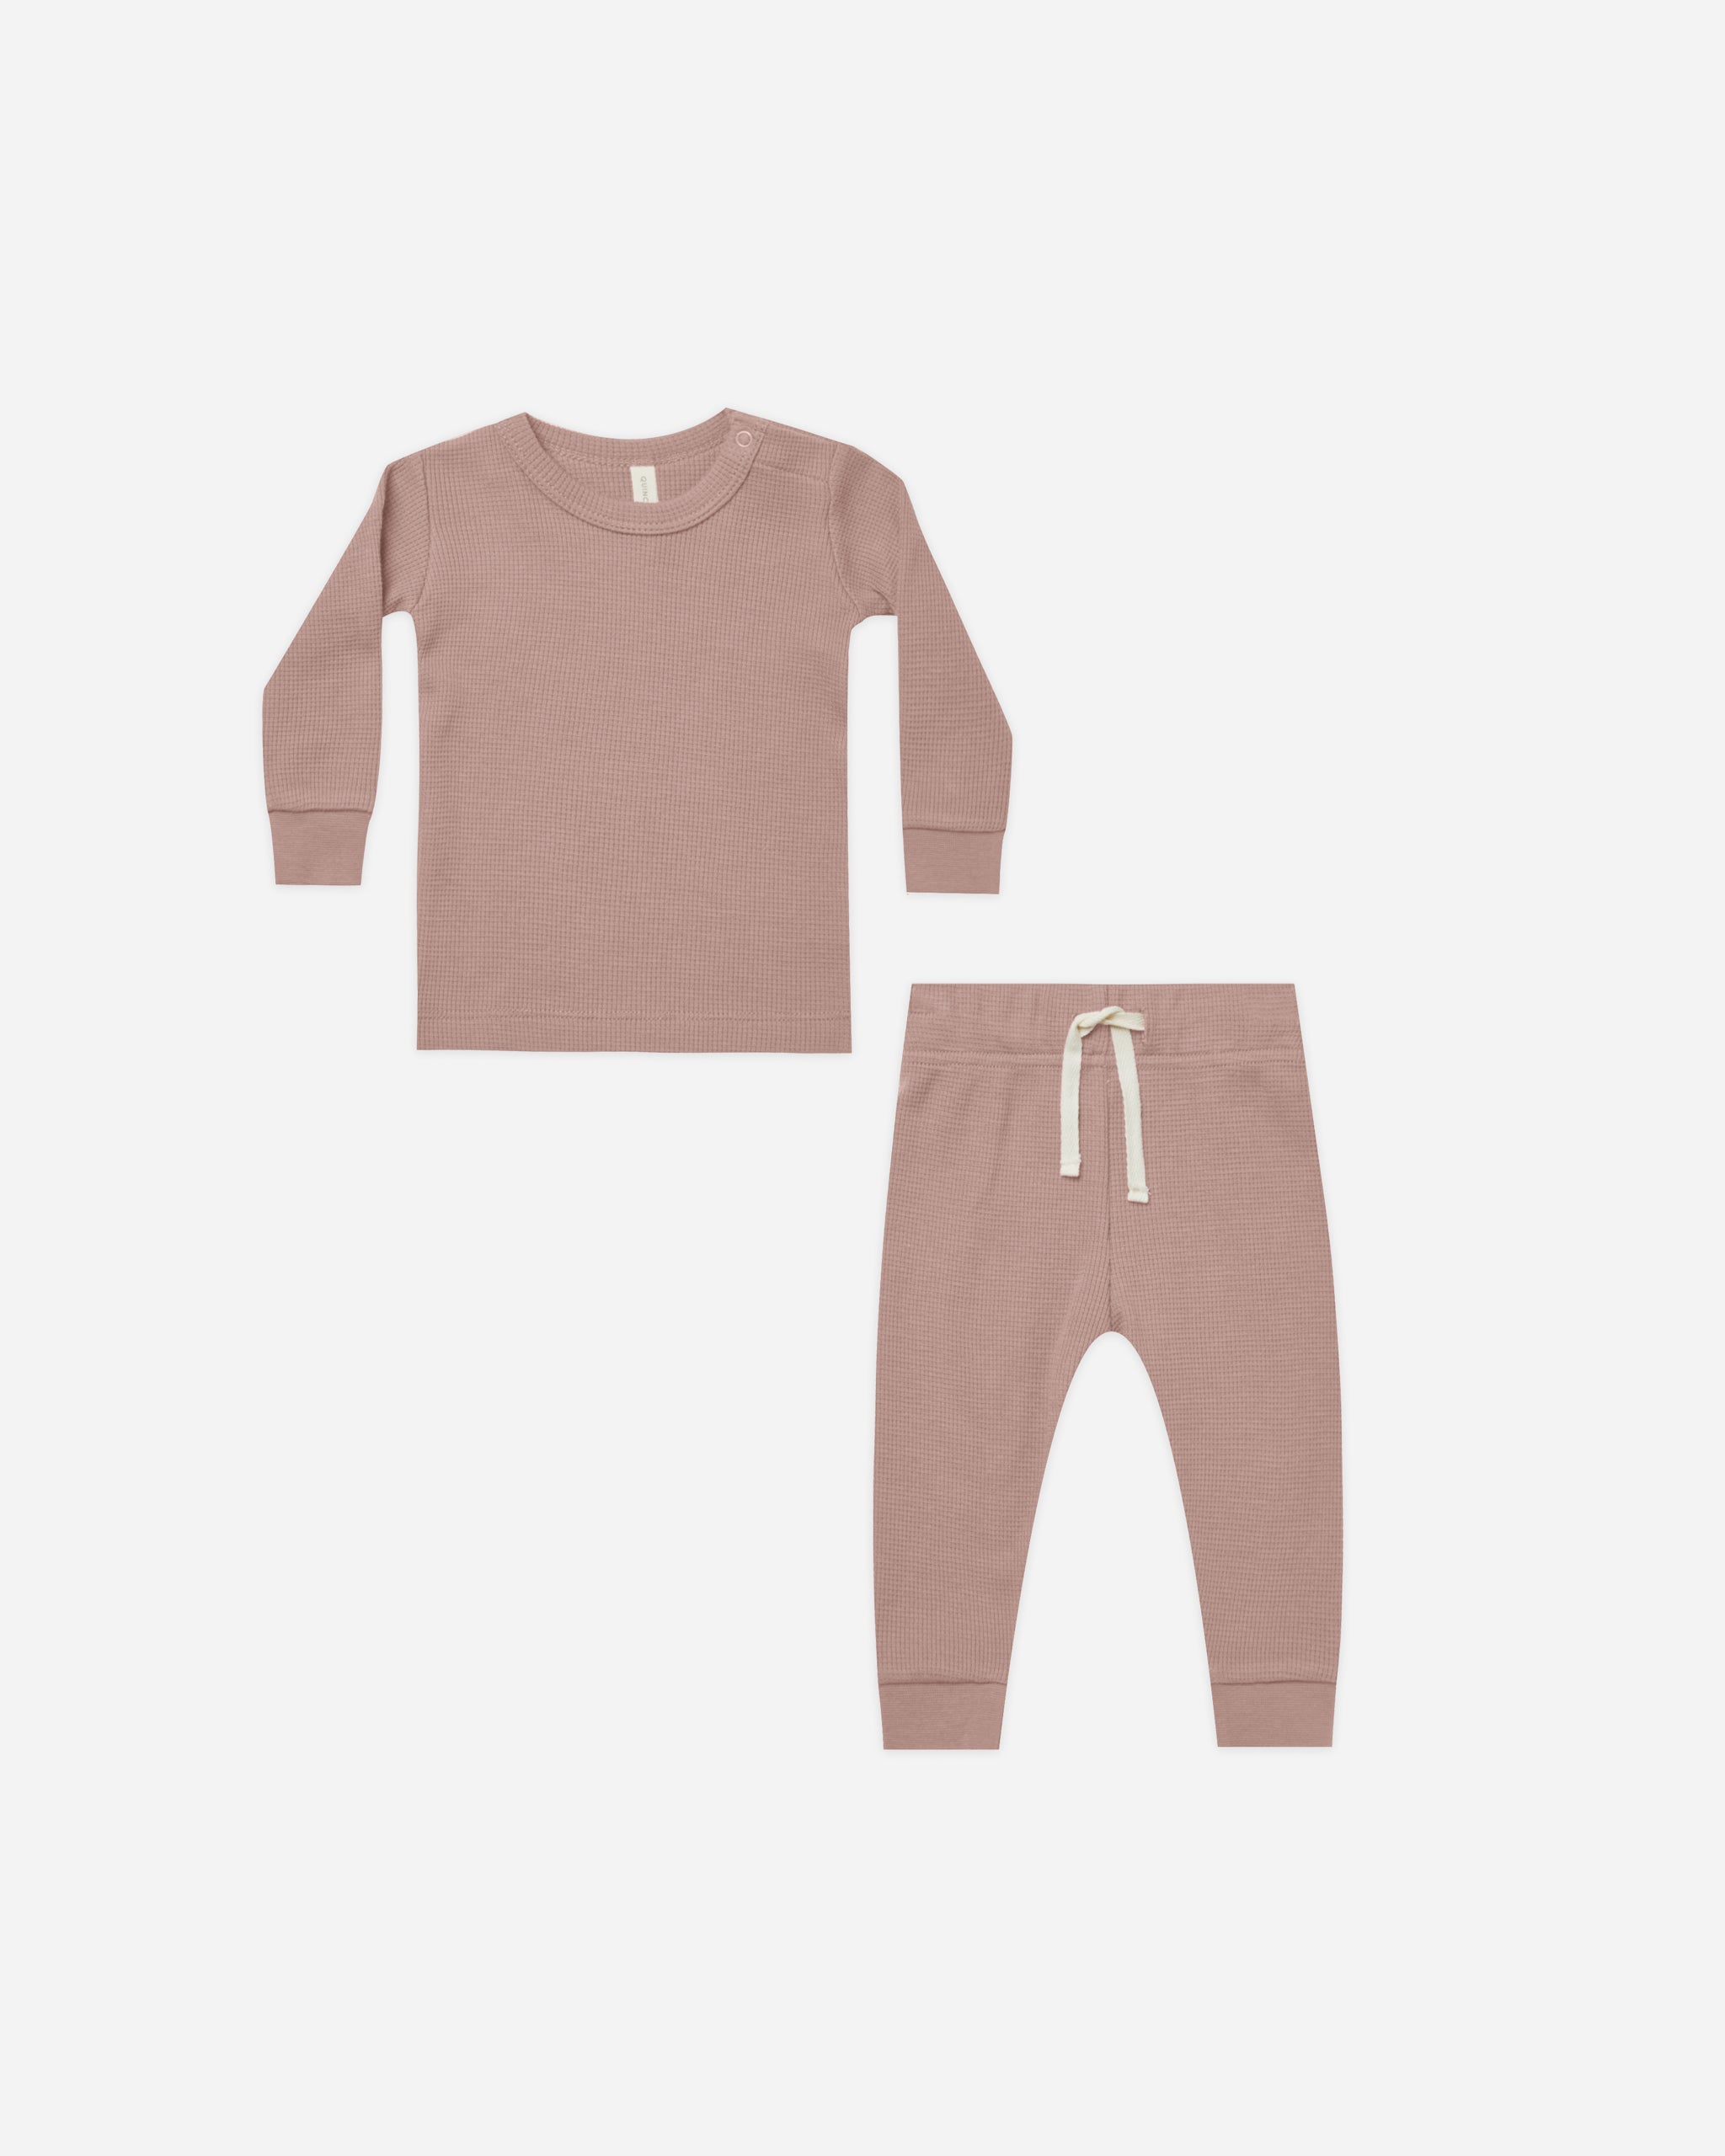 Waffle Top + Pant Set || Mauve - Rylee + Cru | Kids Clothes | Trendy Baby Clothes | Modern Infant Outfits |